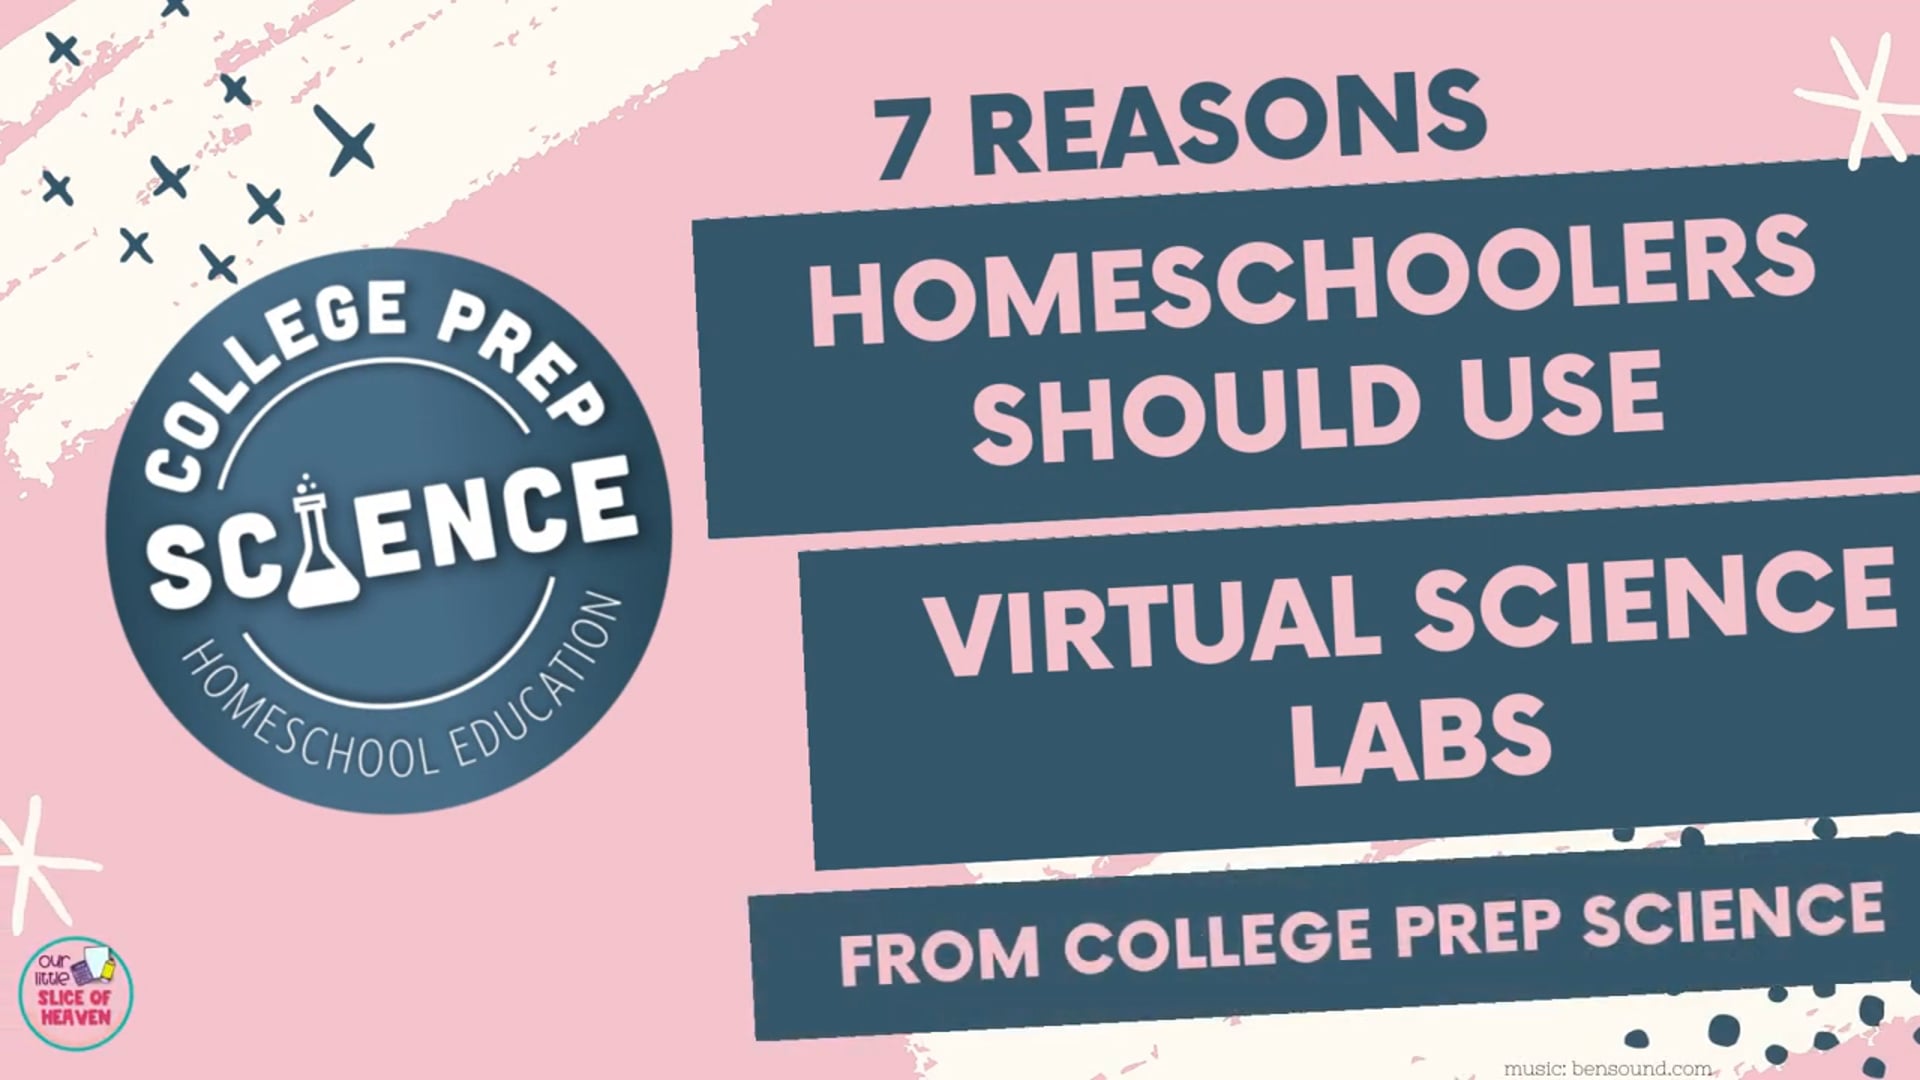 7 Reasons Homeschoolers Should Use Virtual Science Labs from College Prep Science.mp4